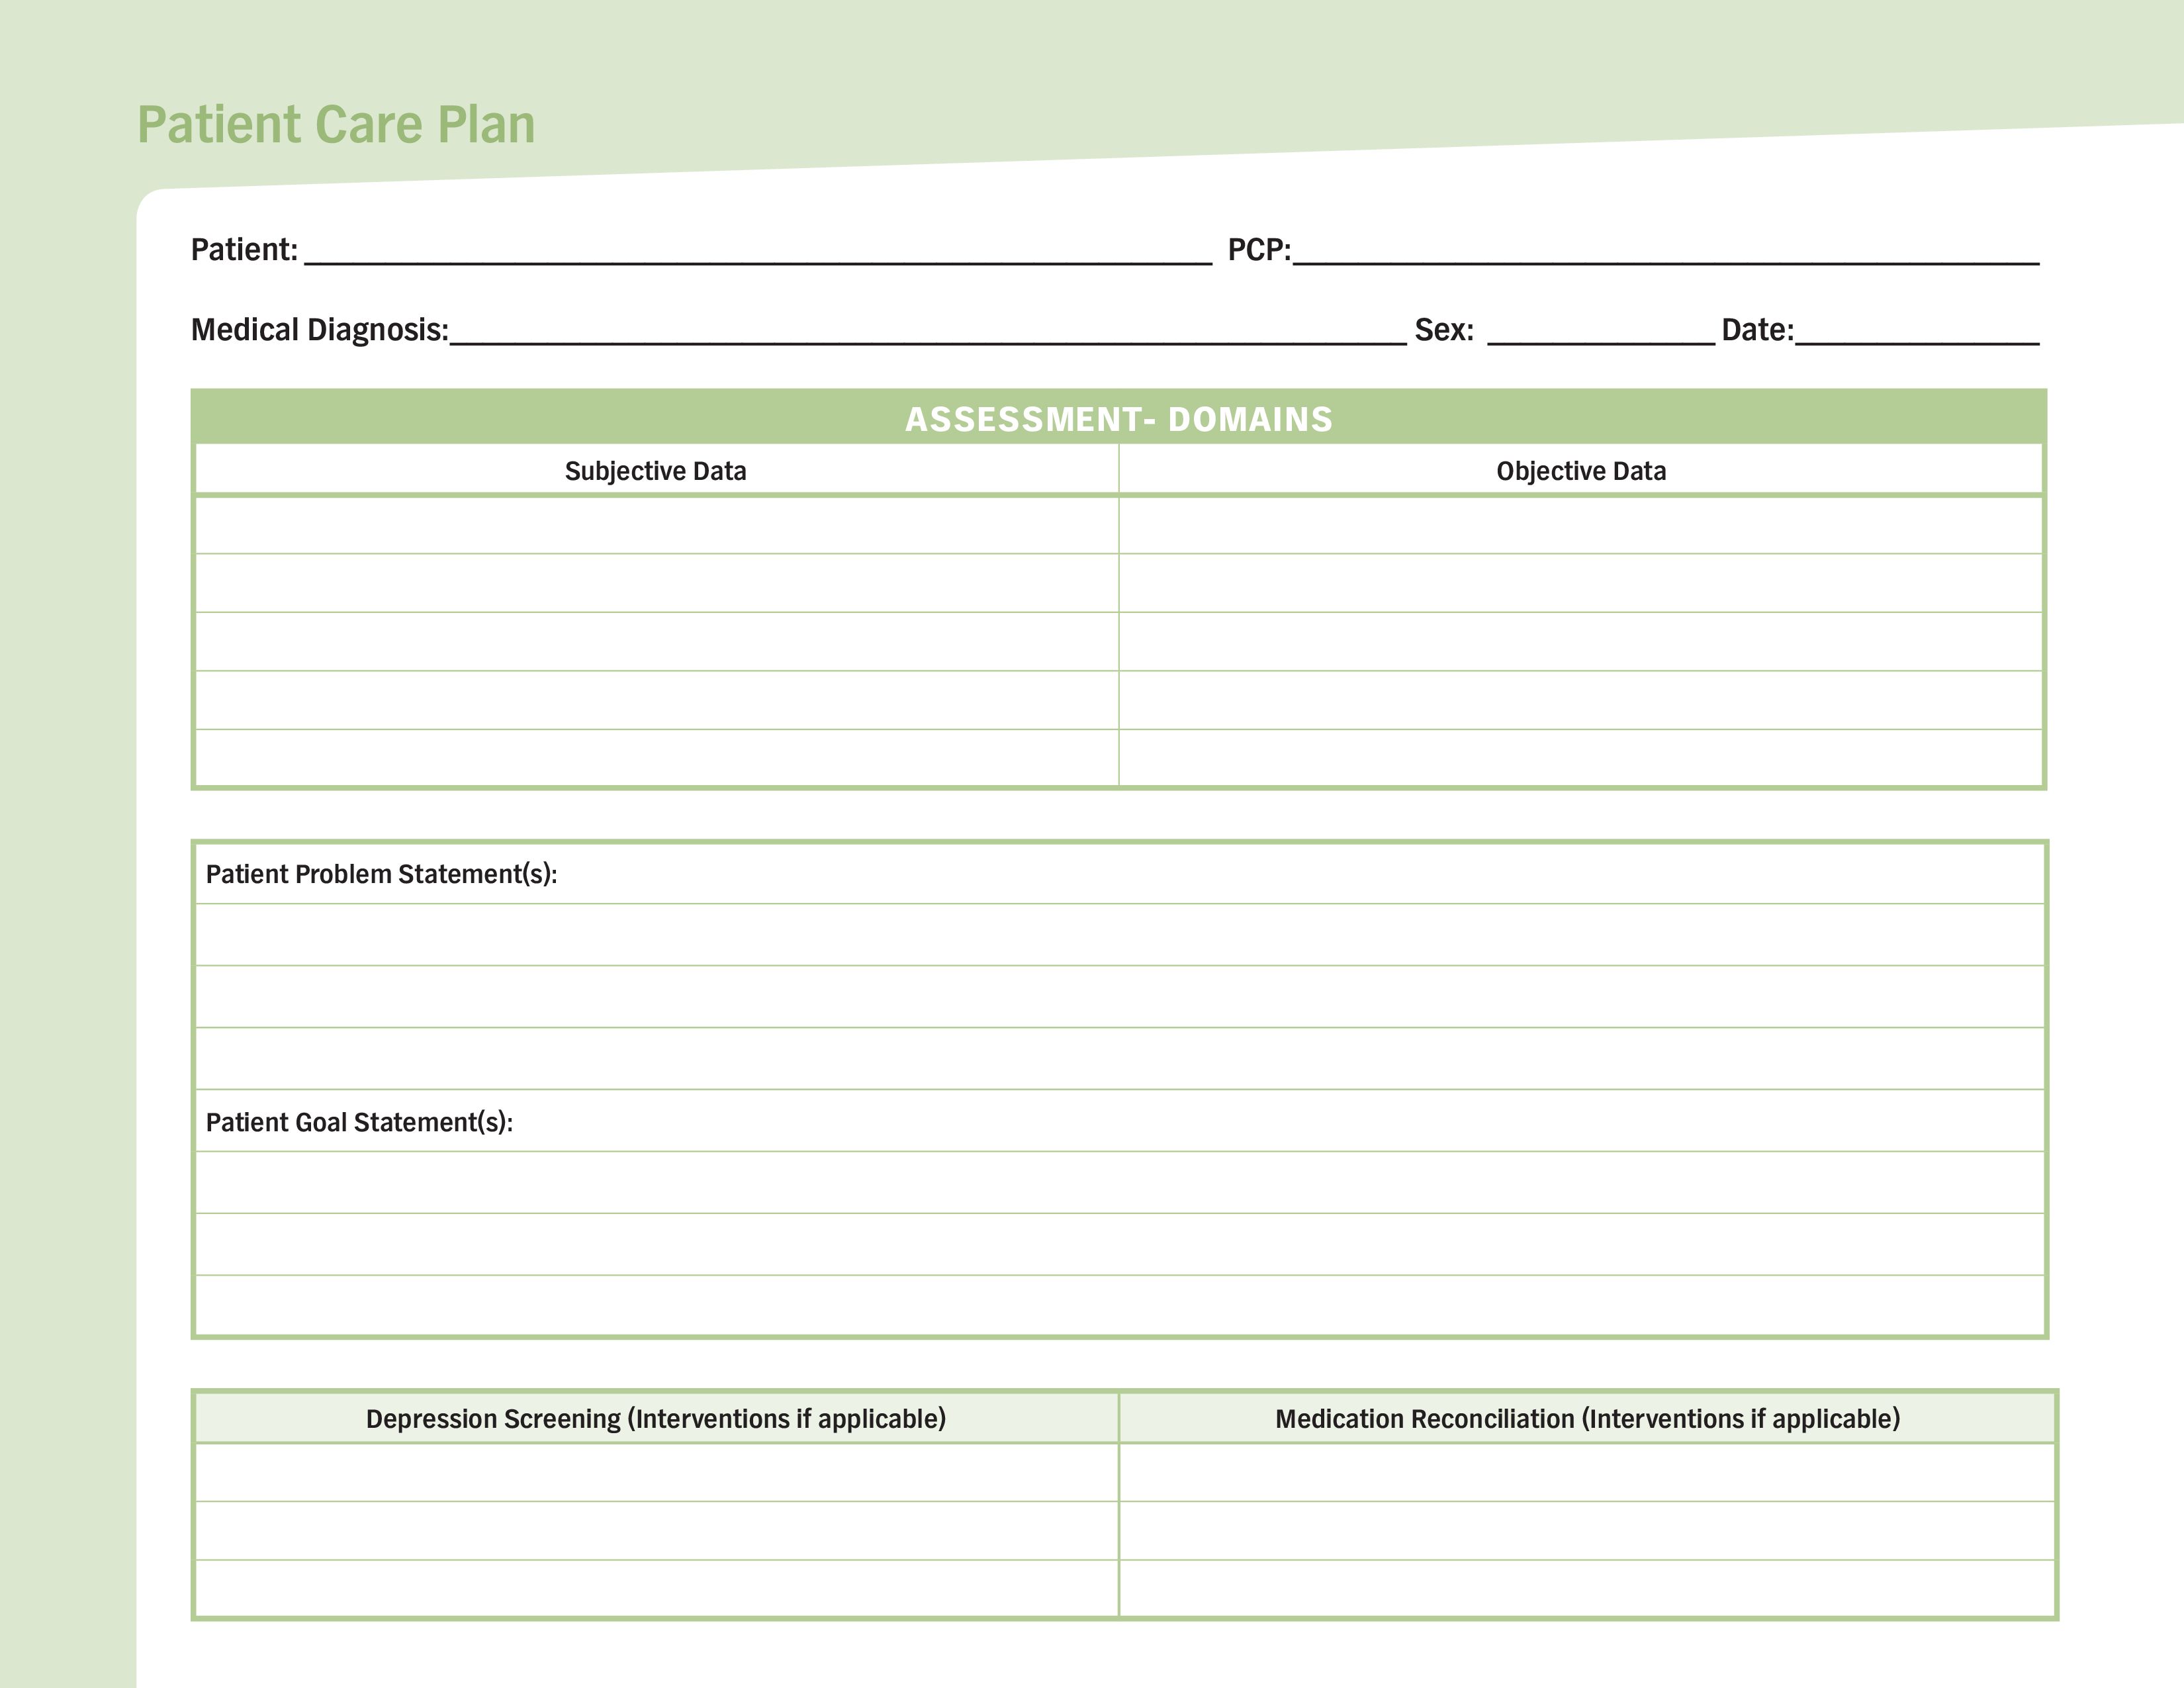 Basic Patient Care Plan Templates at